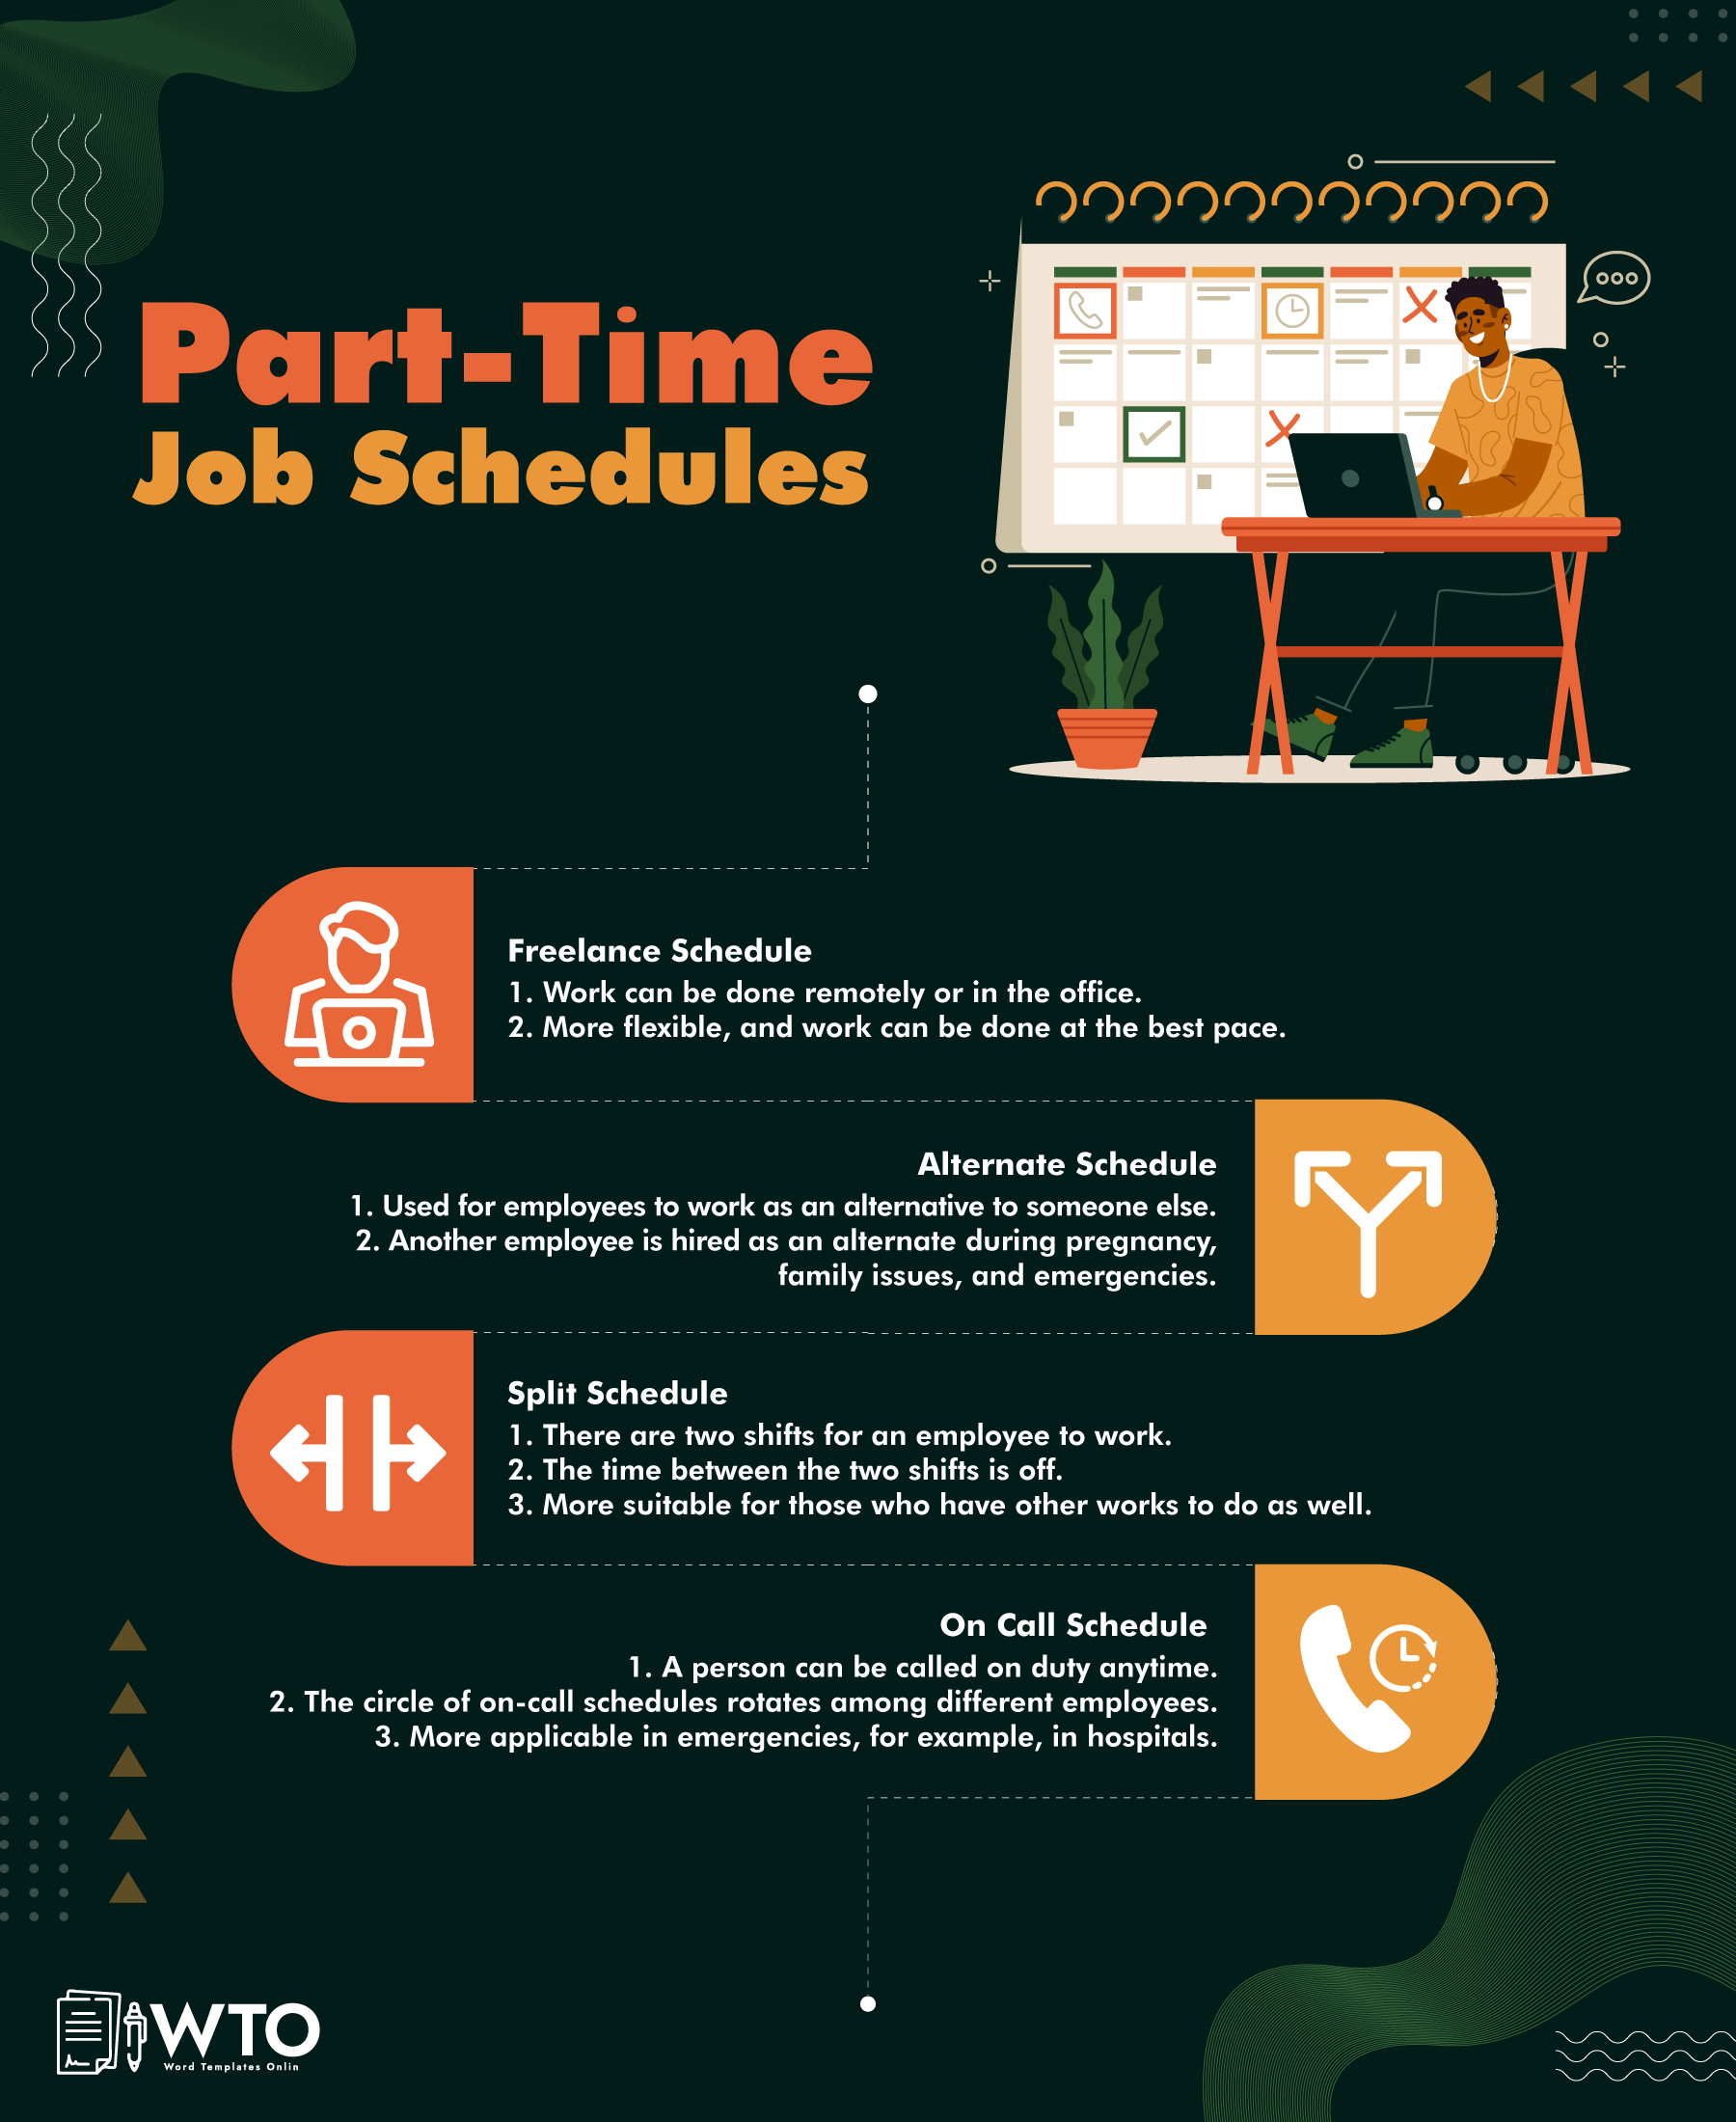 This infographic includes Part Time Job Schedules.